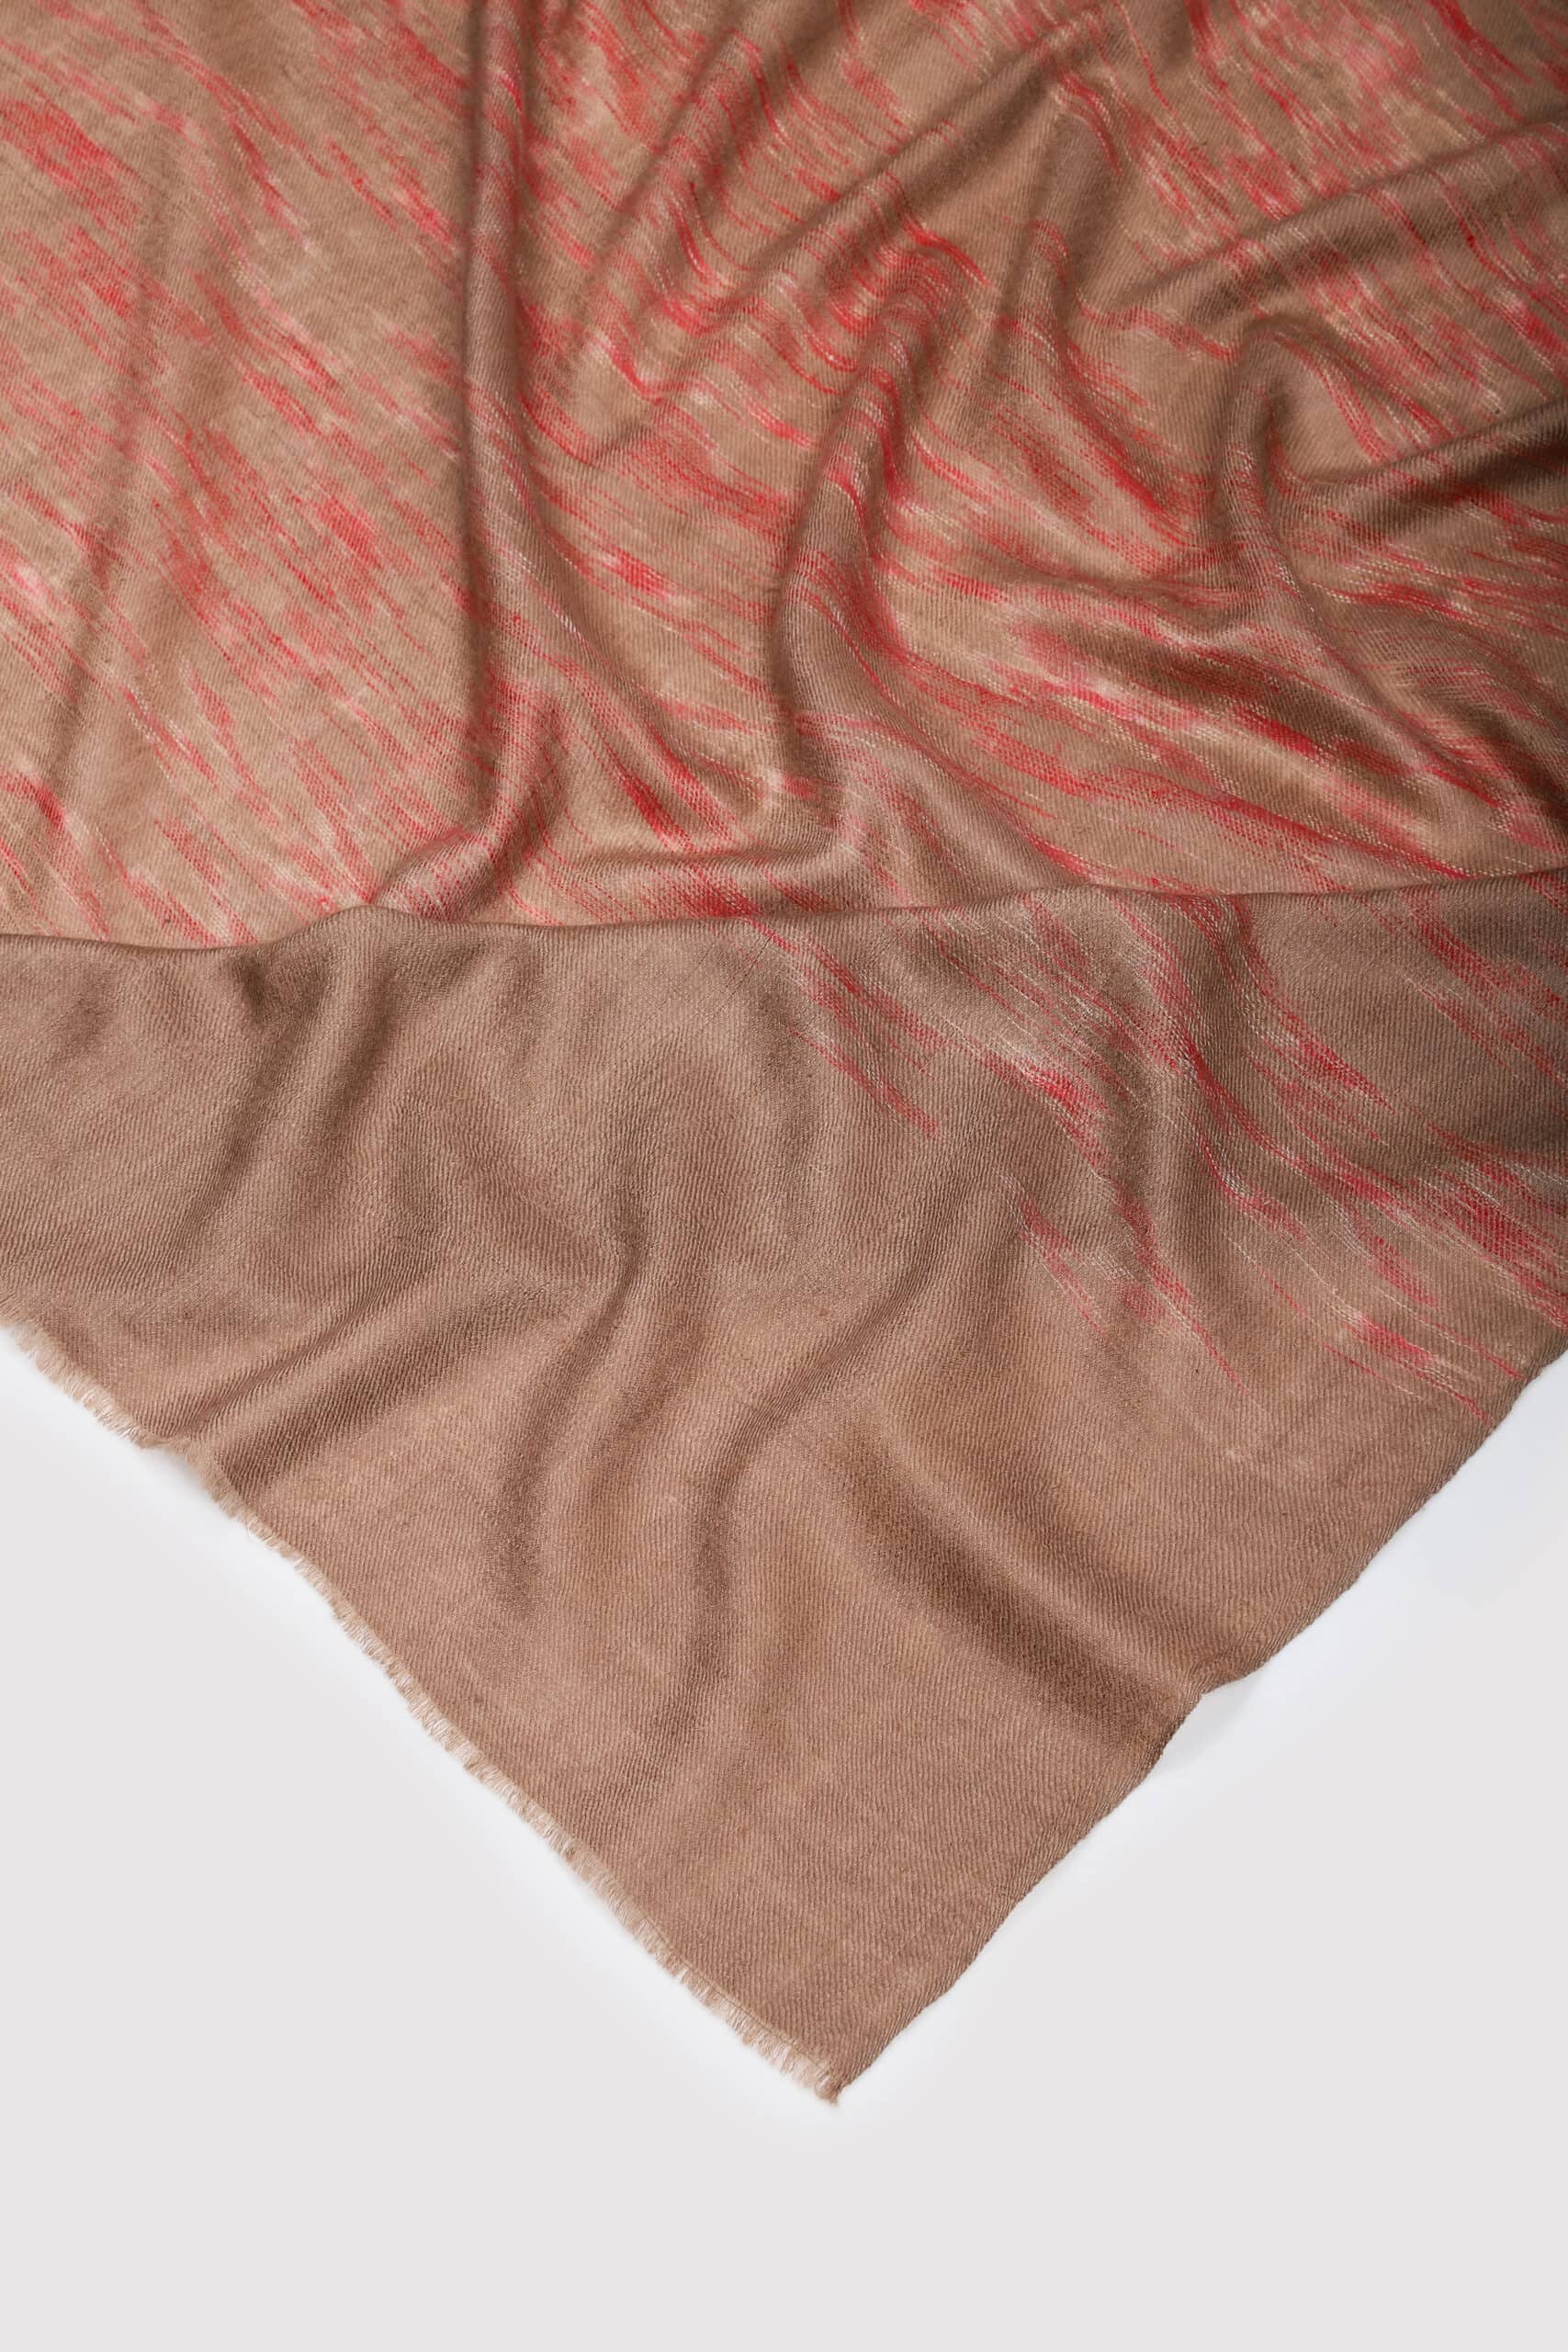 Natural brown & red colored Ikat cashmere shawl on a white background- Me&K